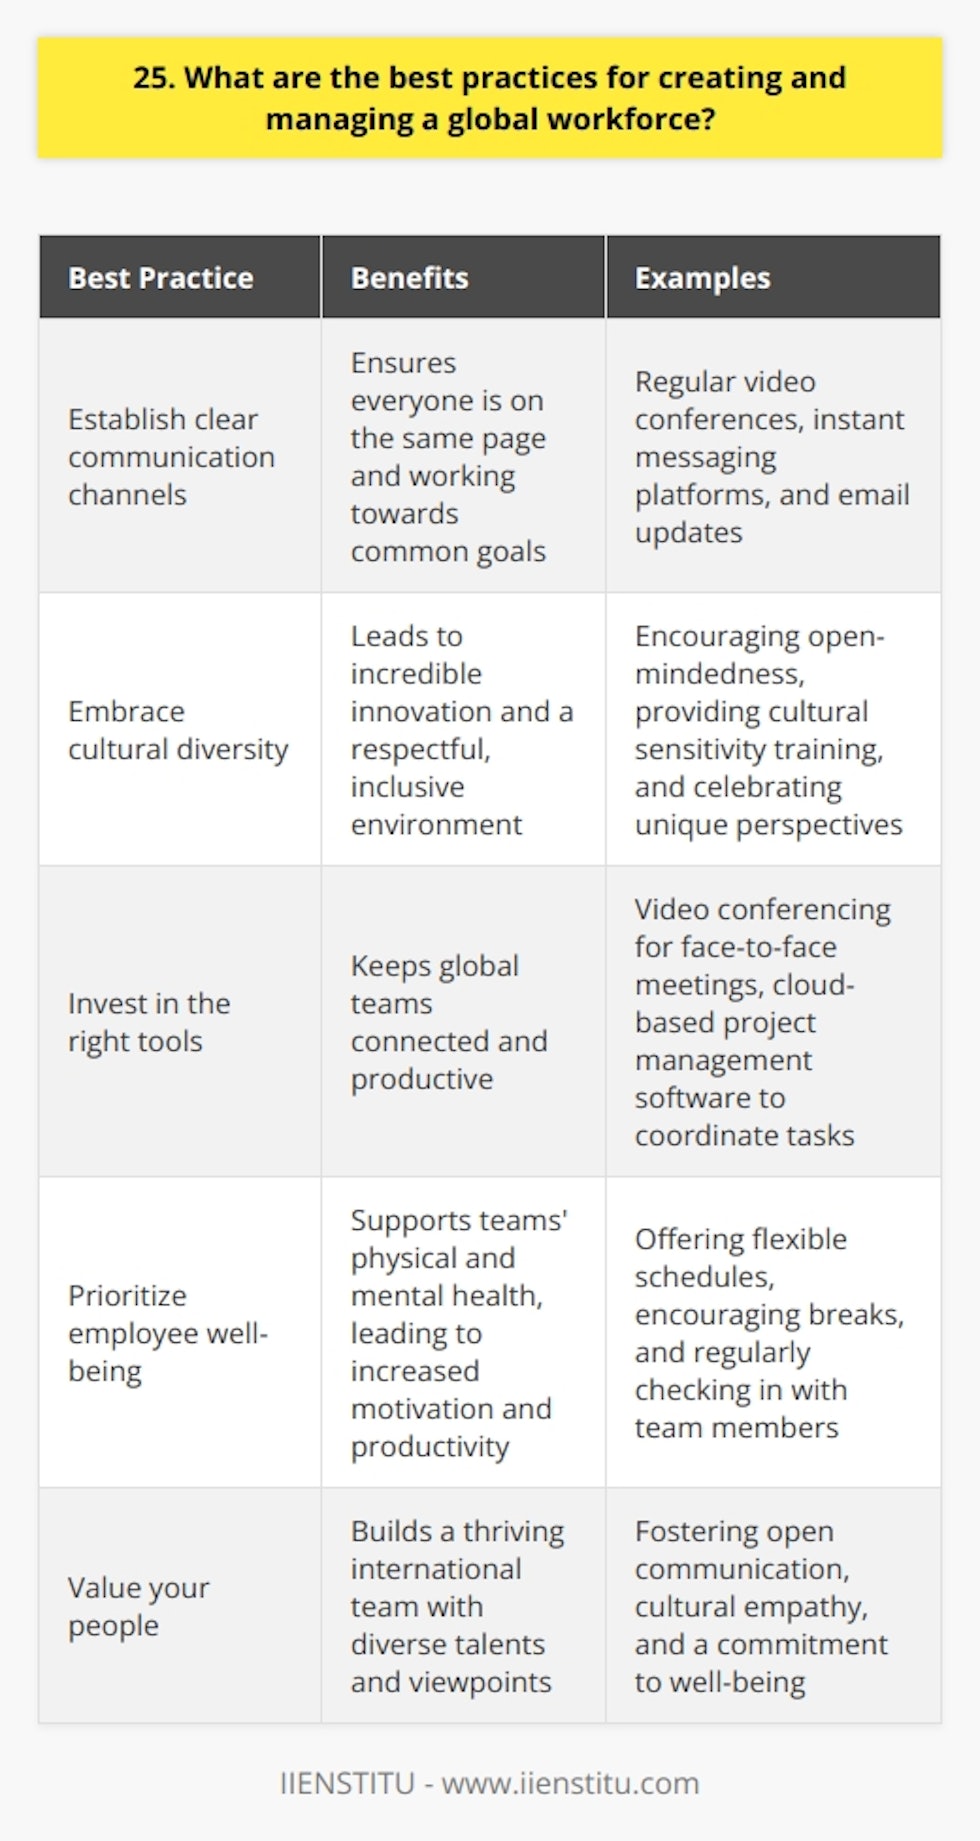 When creating and managing a global workforce, communication is key. Establish clear channels for sharing information across different time zones and cultures. This helps ensure everyone is on the same page and working towards common goals. Embrace Cultural Diversity Ive found that celebrating the unique perspectives and experiences each team member brings can lead to incredible innovation. Encourage open-mindedness and provide cultural sensitivity training to foster a respectful, inclusive environment. Some of my best ideas have come from collaborating with colleagues from totally different backgrounds. Invest in the Right Tools To keep a global team connected and productive, you need reliable tools. Im a big fan of video conferencing for face-to-face meetings and cloud-based project management software to coordinate tasks. Just be sure to choose user-friendly platforms and provide ample training. Theres nothing more frustrating than tech hiccups derailing your workflow! Prioritize Employee Well-Being Working across borders can be challenging, so its crucial to support your teams physical and mental health. Offer flexible schedules when possible, encourage breaks, and check in regularly. Ill never forget how supported I felt when my manager noticed I was burning out and insisted I take some time off. That compassion made me even more motivated to do my best work. At the end of the day, successfully managing a global workforce comes down to valuing your people. With open communication, cultural empathy, the right tools, and a commitment to well-being, you can build a thriving international team. The diverse talents and viewpoints are well worth the effort!